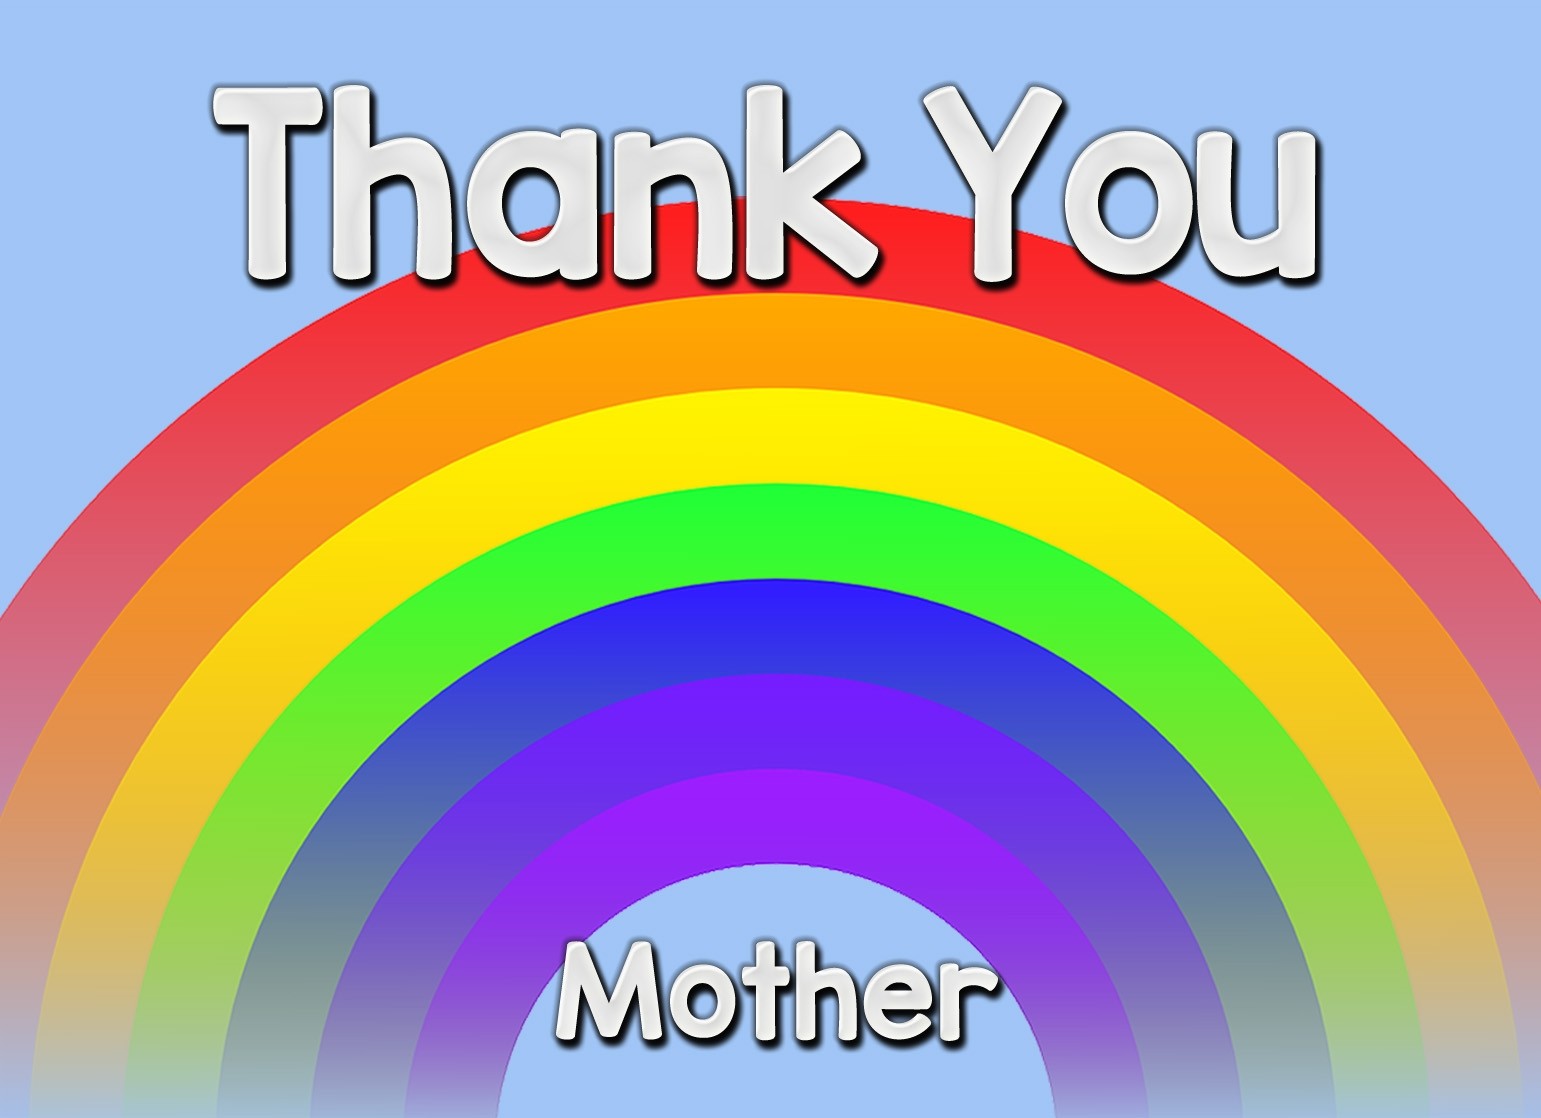 Thank You 'Mother' Rainbow Greeting Card